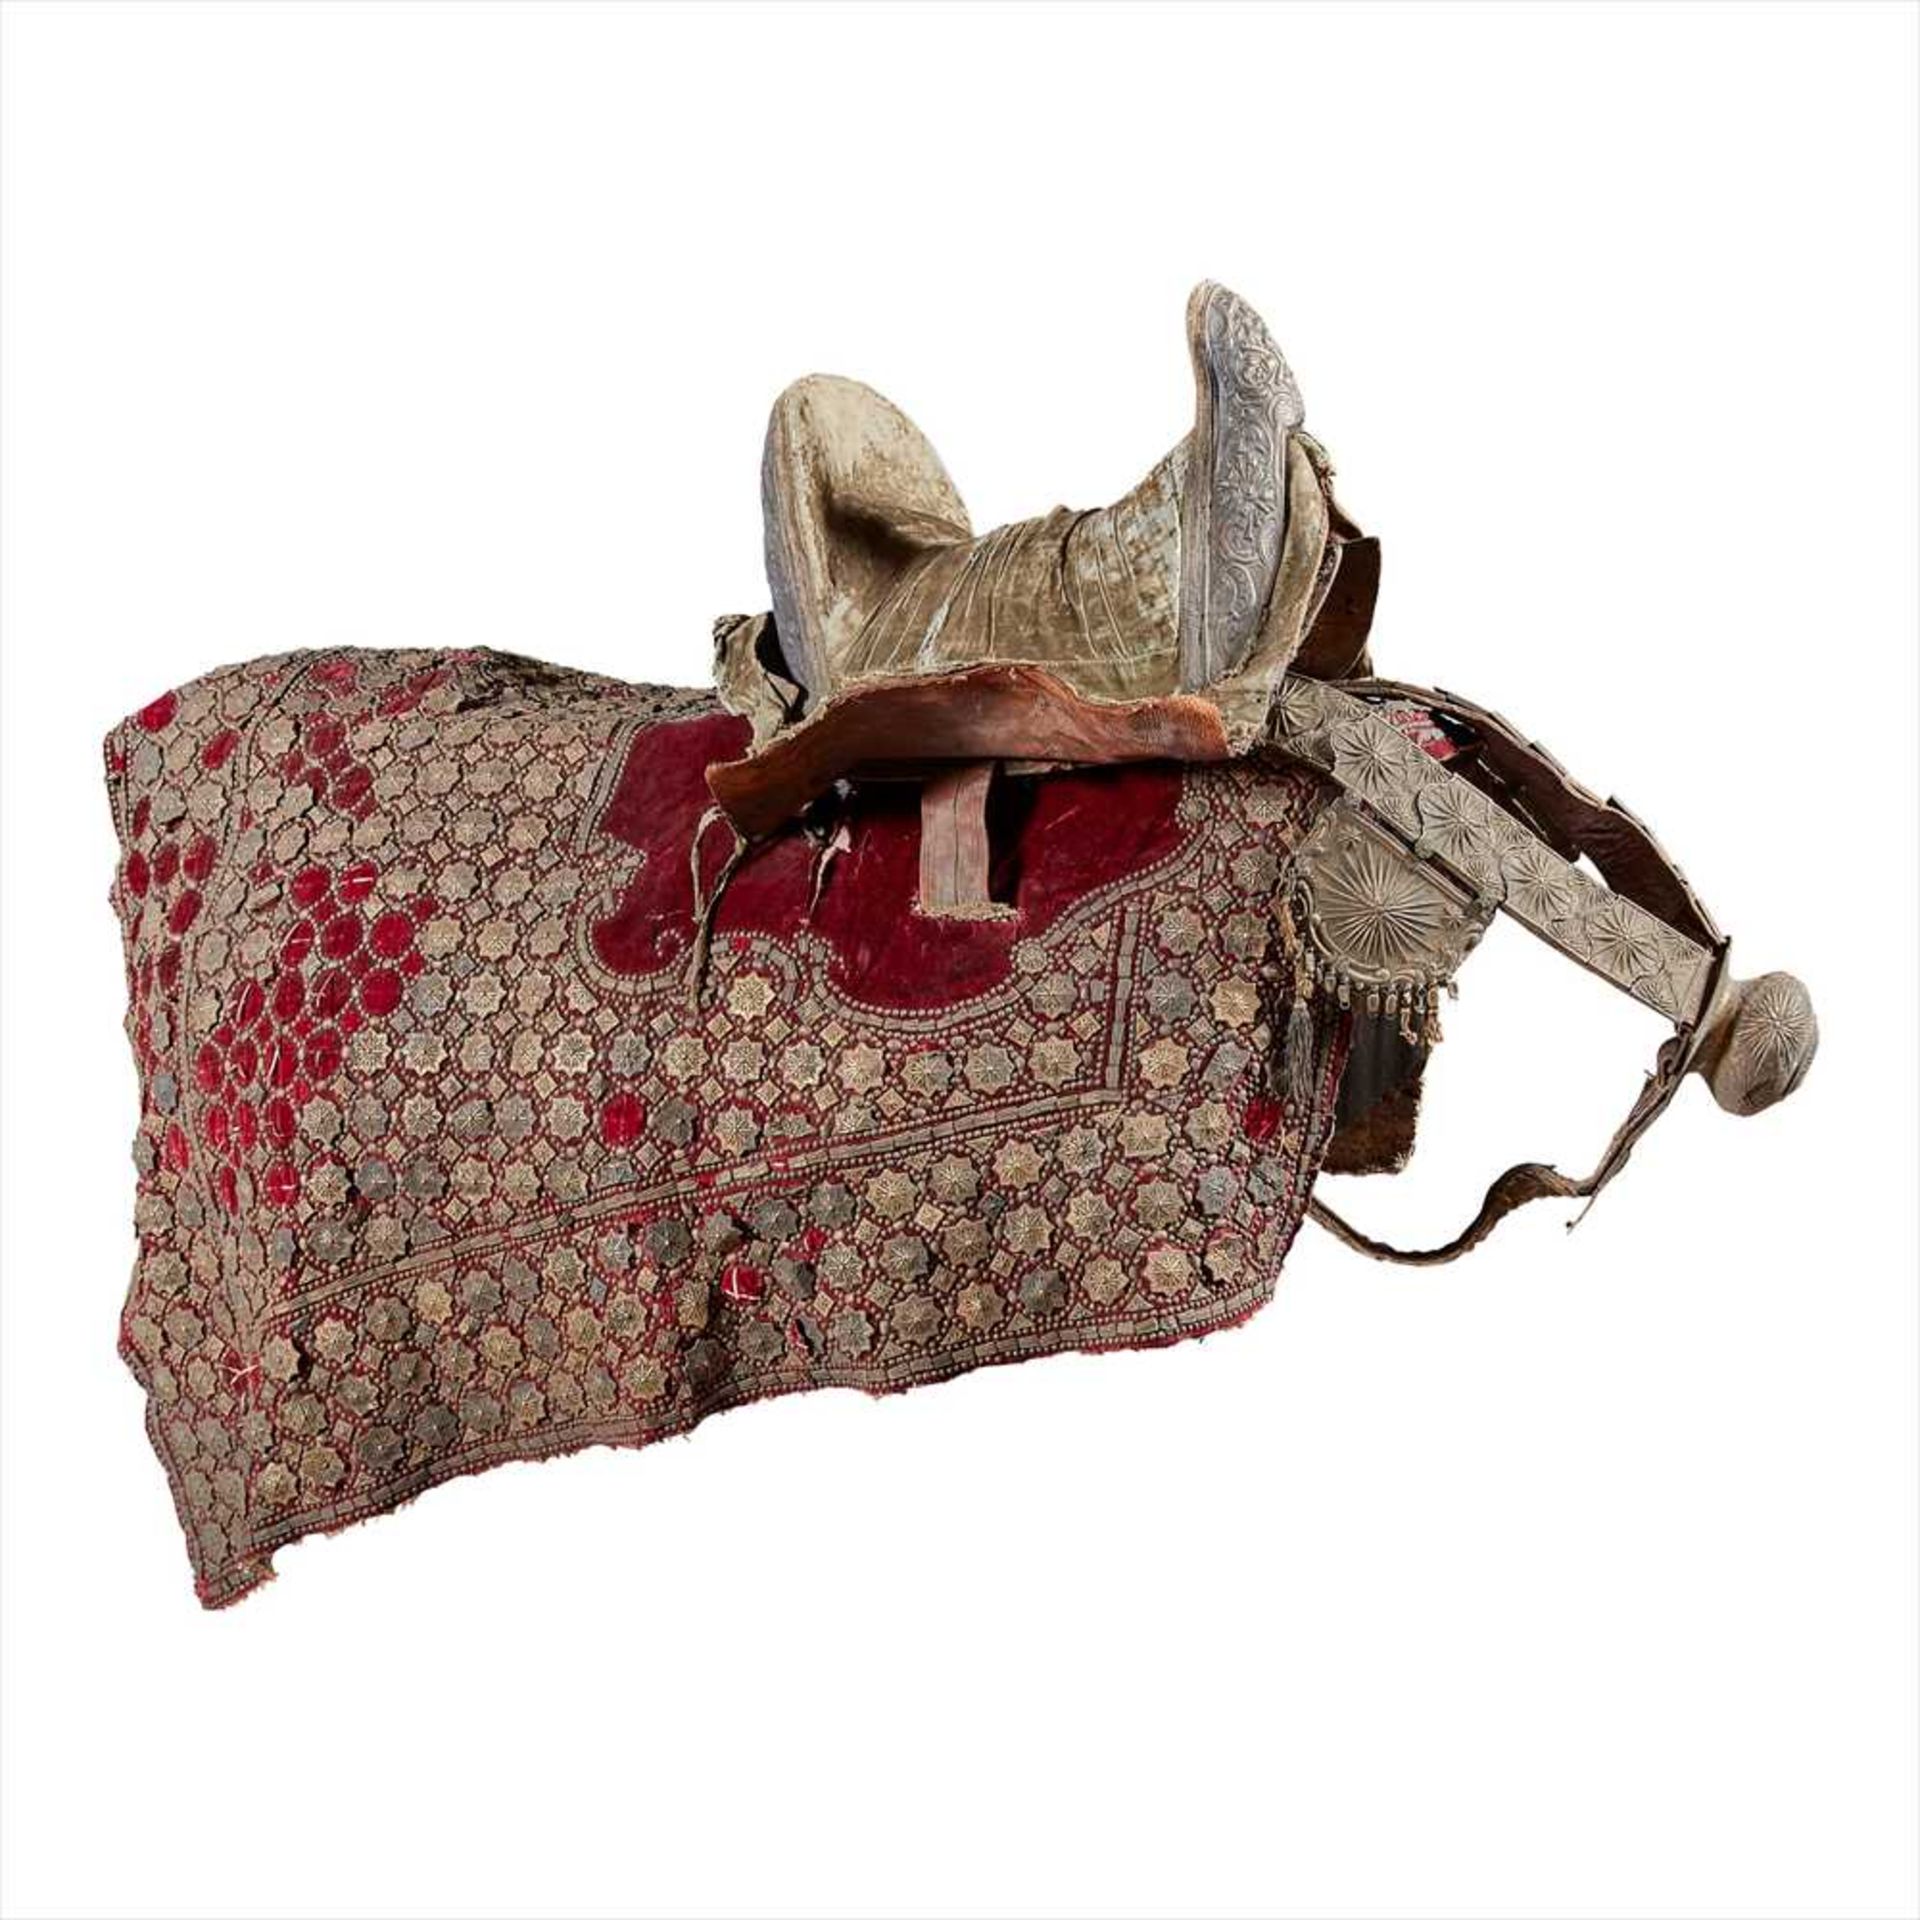 OTTOMAN SADDLE, RED VELVET SADDLE-CLOTH, AND TACKLE LATE 18TH/ EARLY 19TH CENTURY